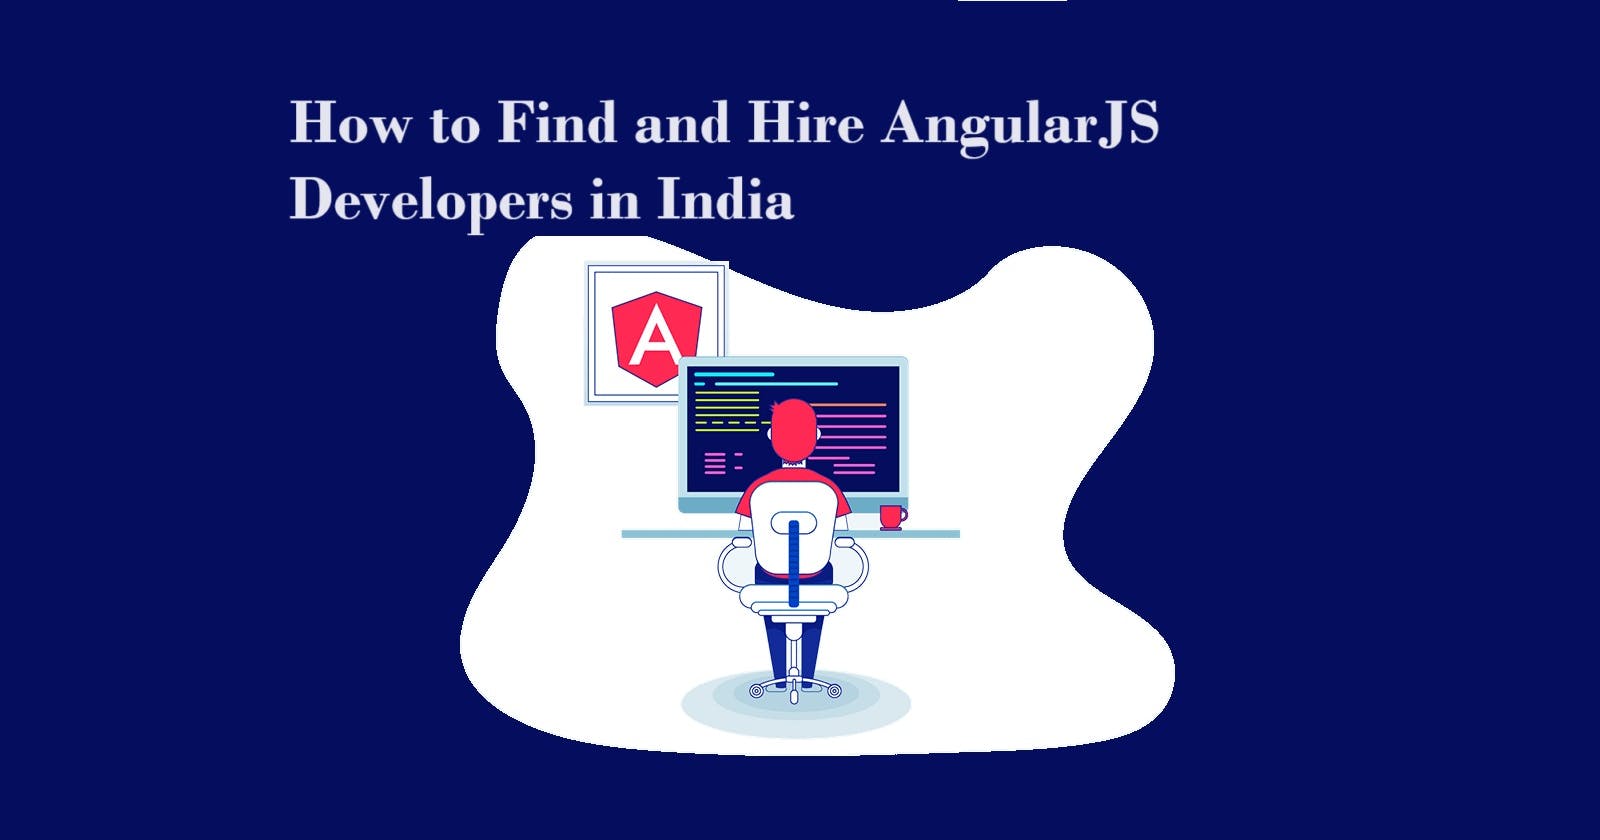 How to Find and Hire AngularJS Developers in India